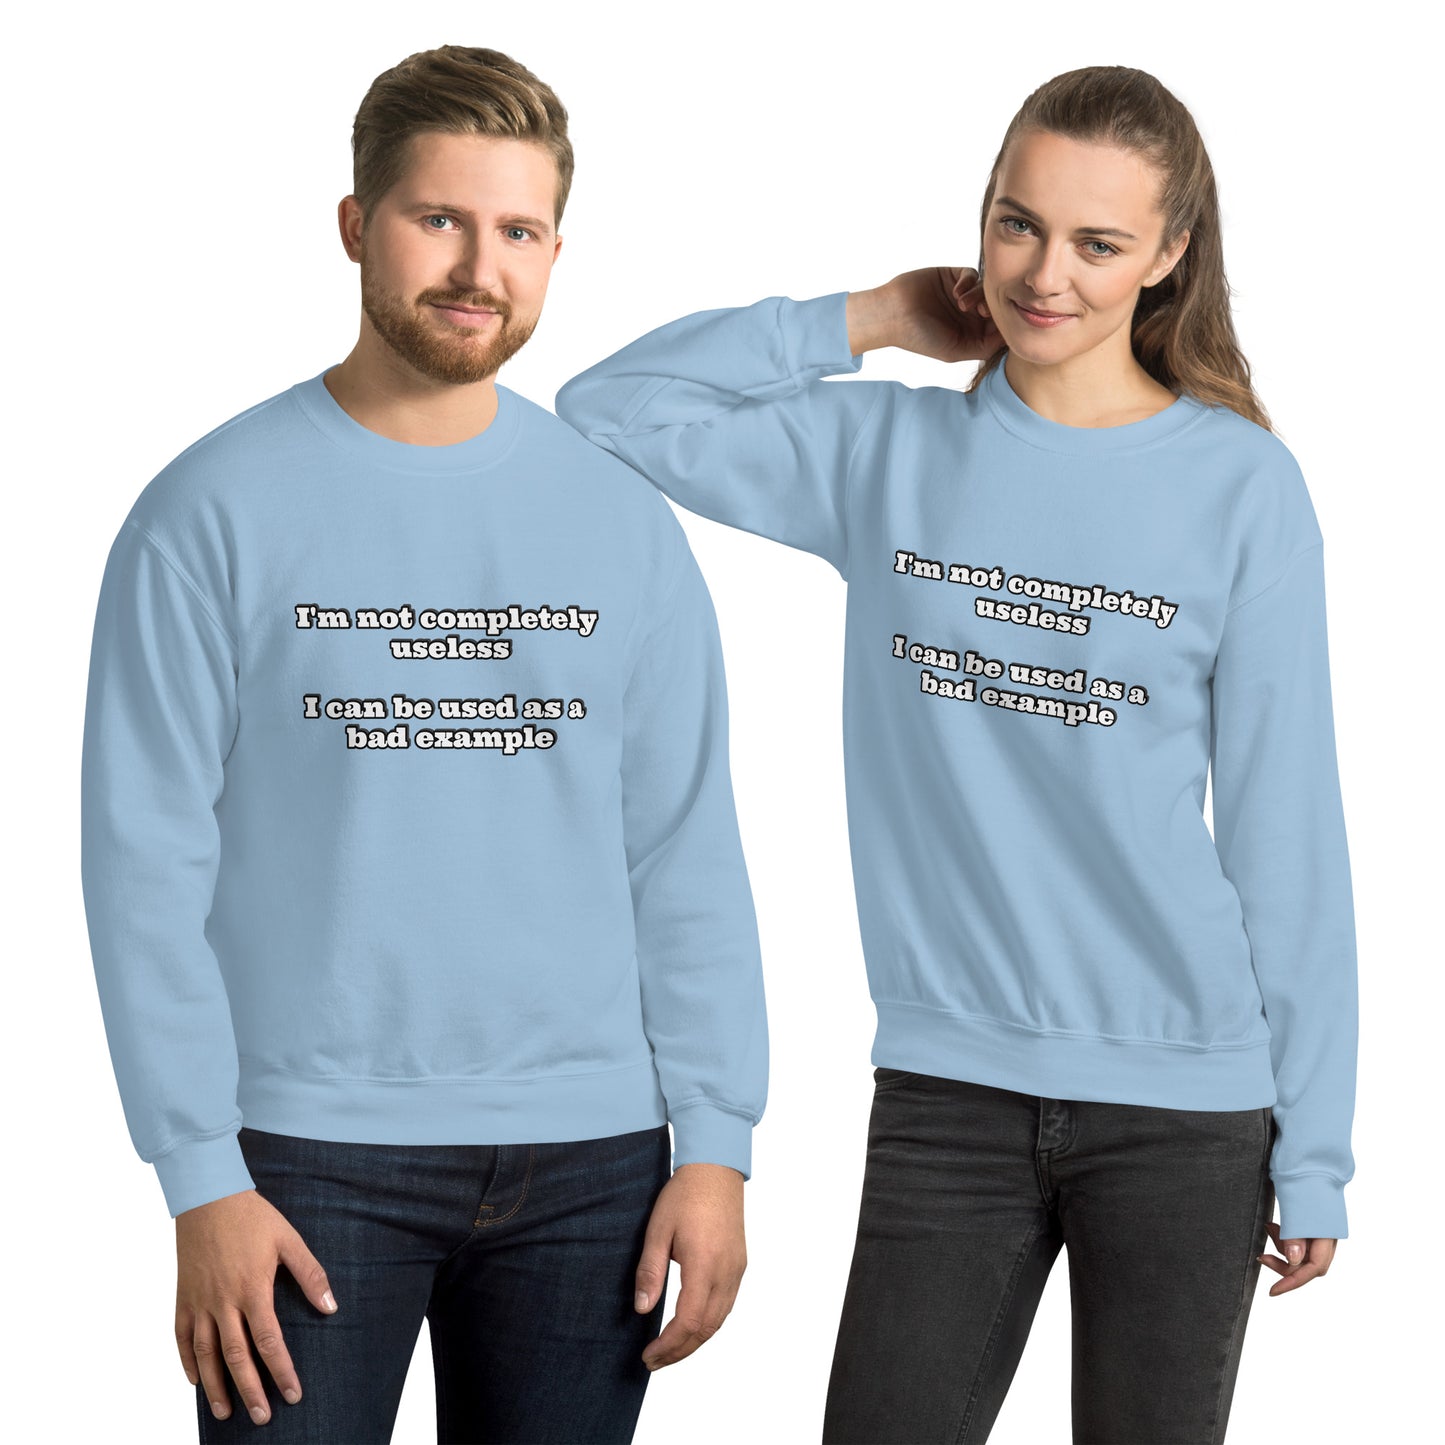 Man and women with light blue sweatshirt with text “I'm not completely useless I can be used as a bad example”